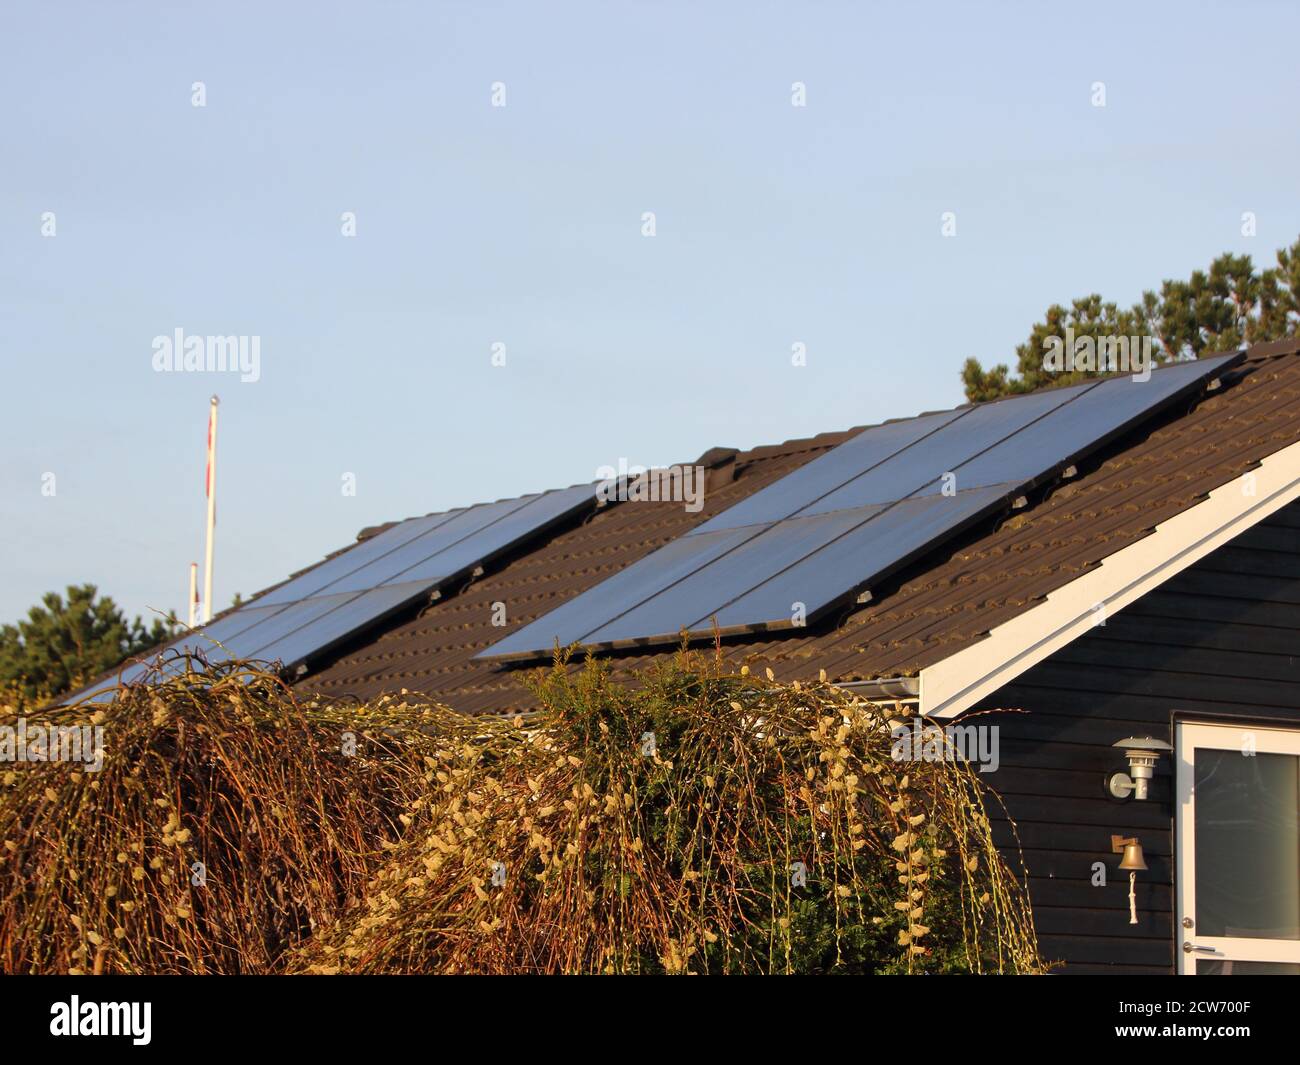 Two sets of solar cell panels on the roof of a black scandiniavian-style house. Bushes can be seen in the front and several flag poles are visible in Stock Photo